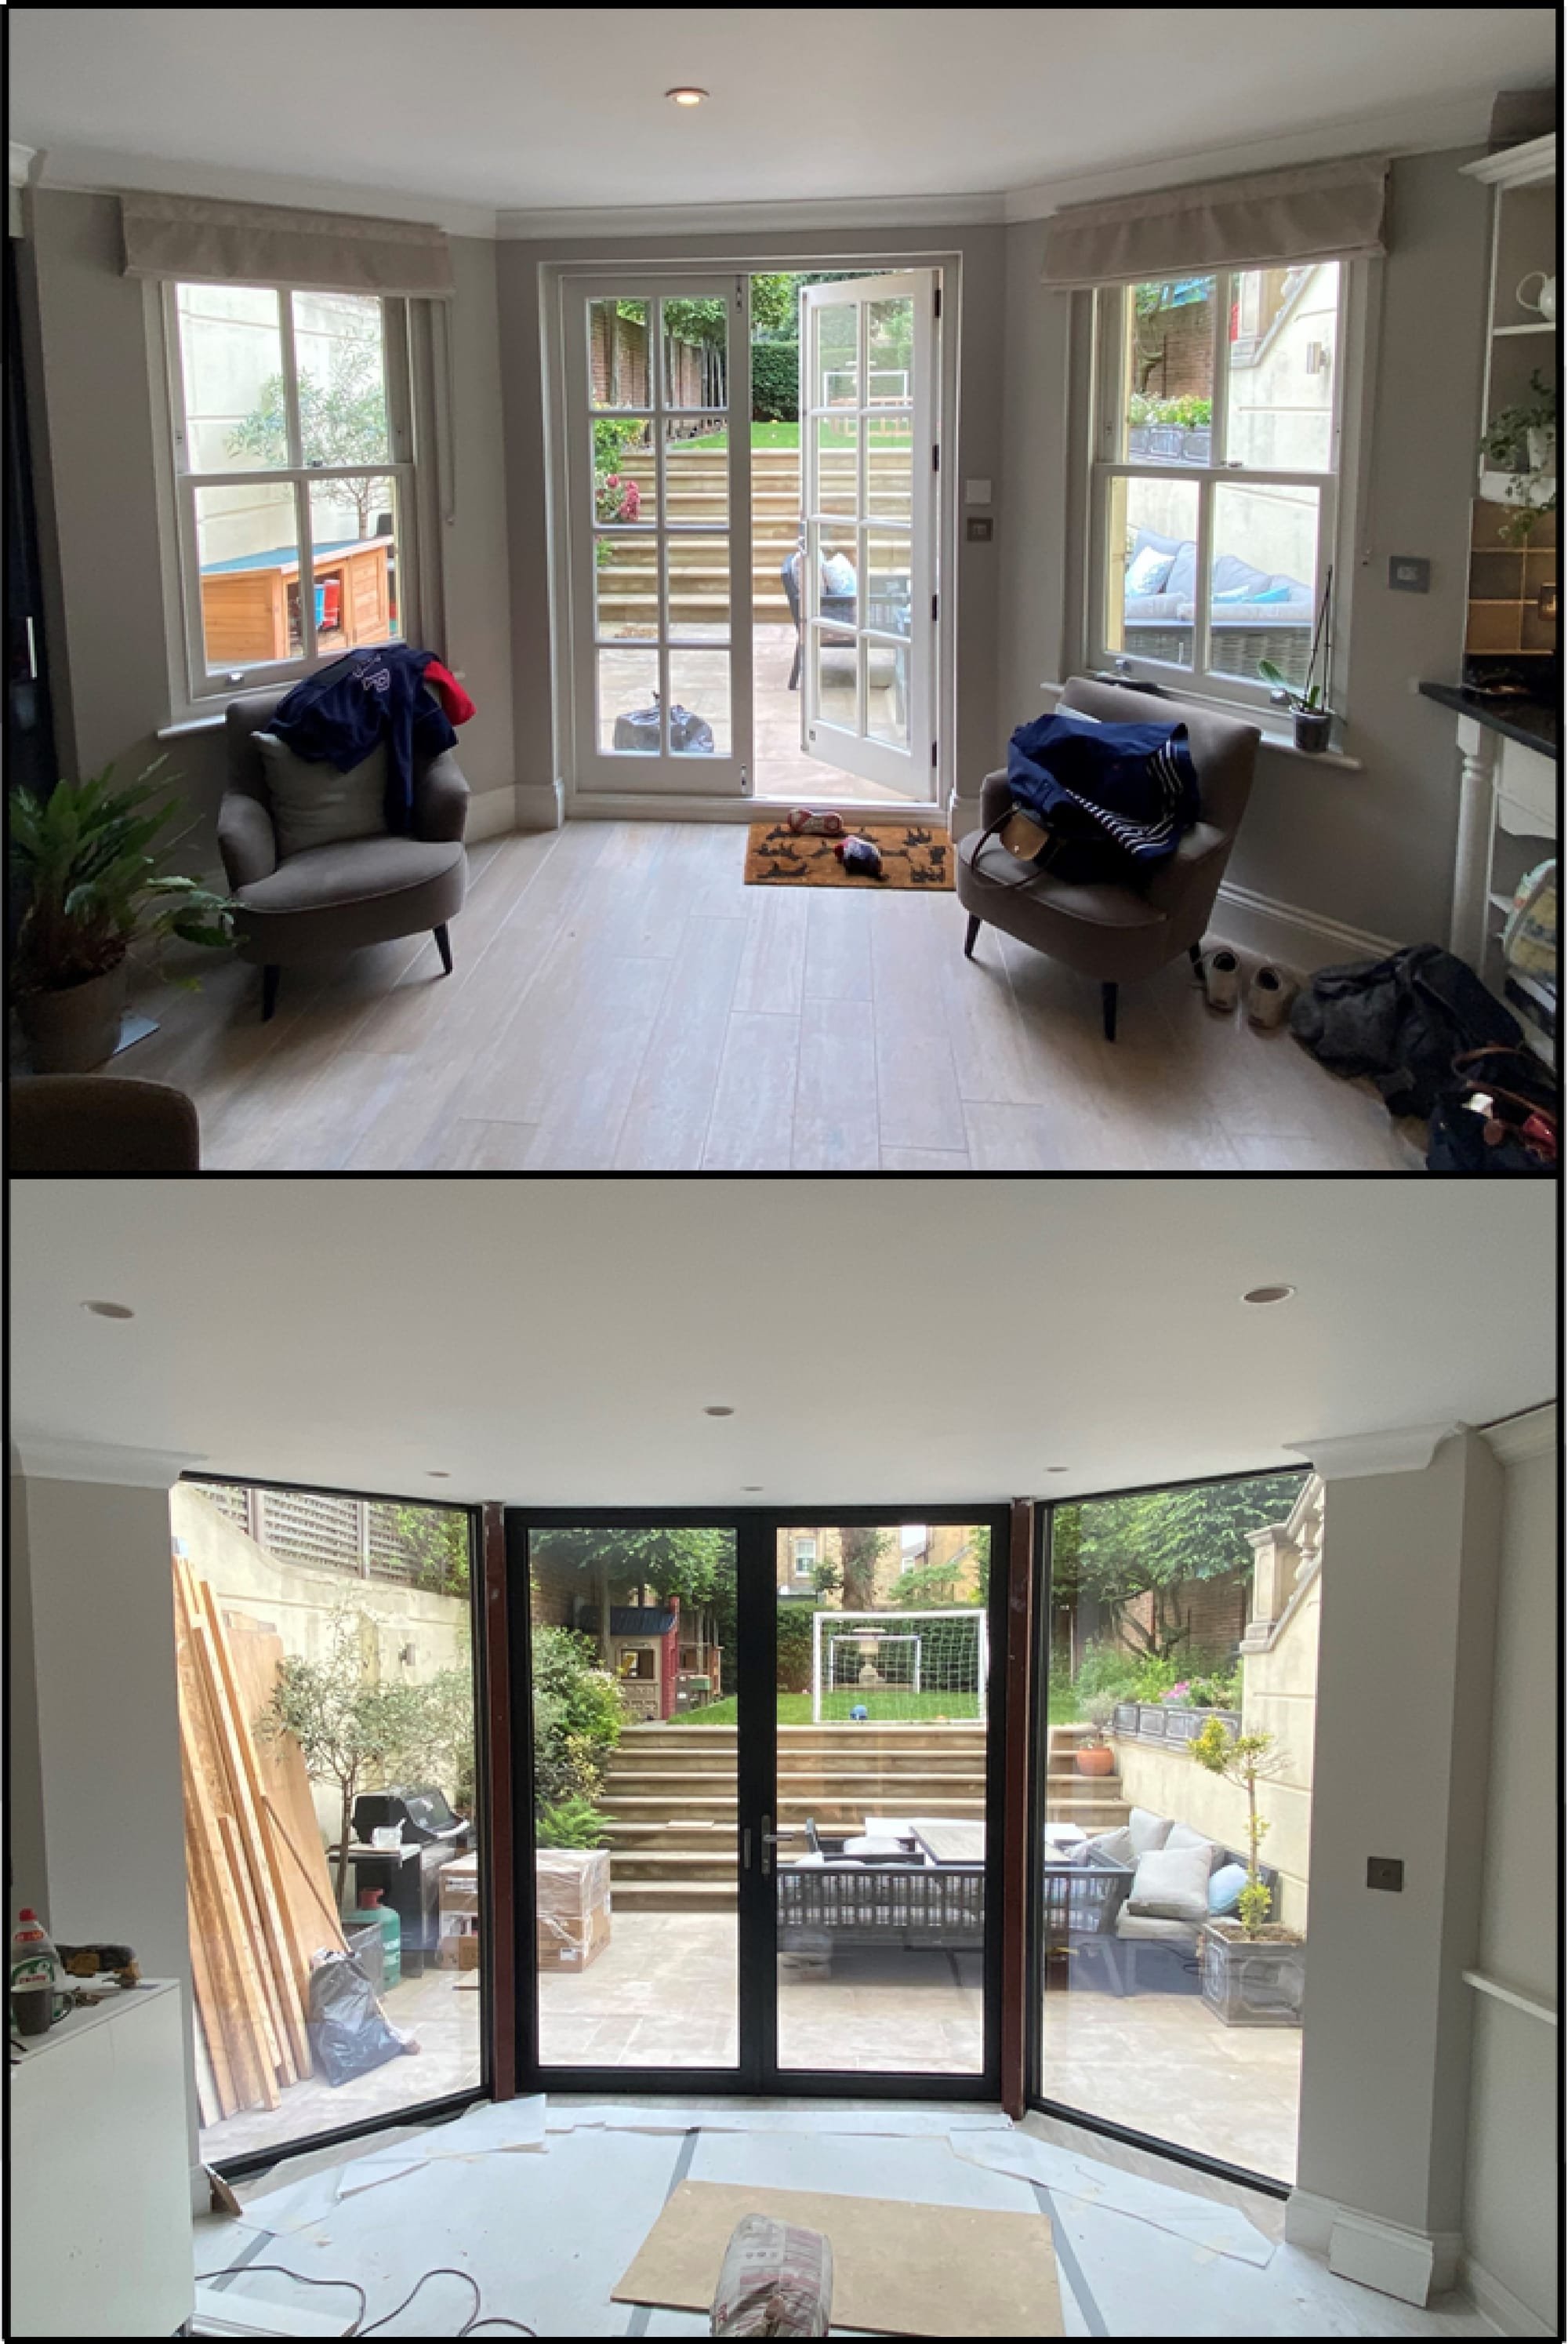 Before and after kitchen refurbishment works in Clapham, SW11